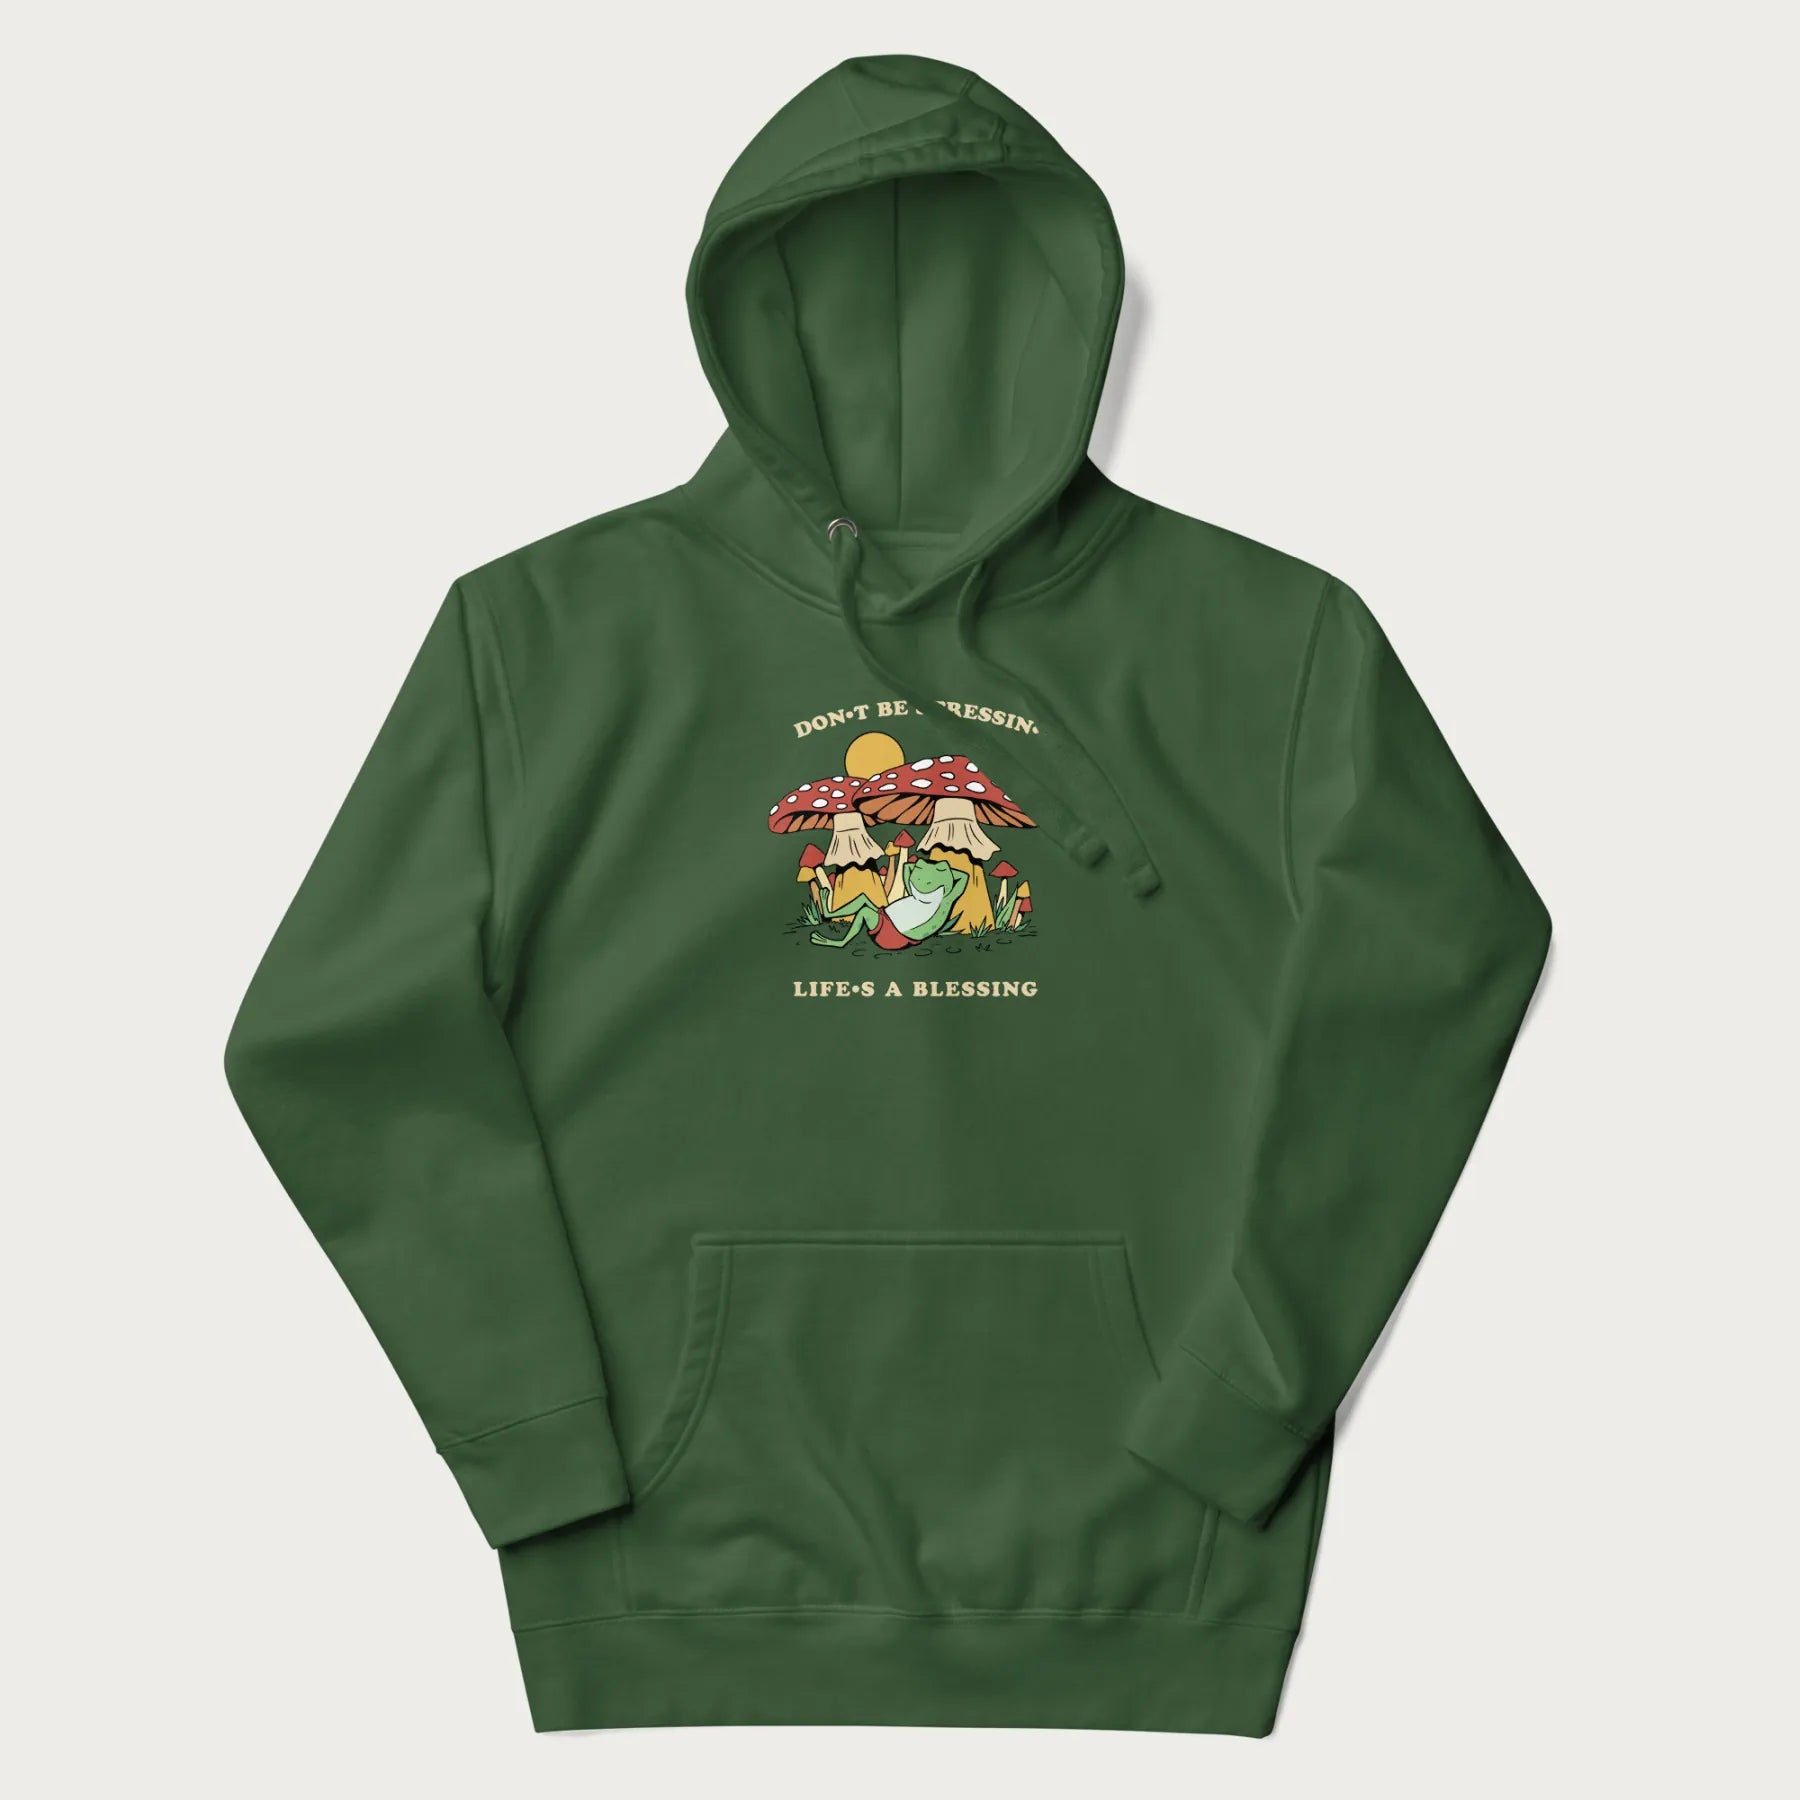 Forest green hoodie with a graphic of a frog lounging under mushrooms and the phrases 'Don't Be Stressin' Life's a Blessing'.